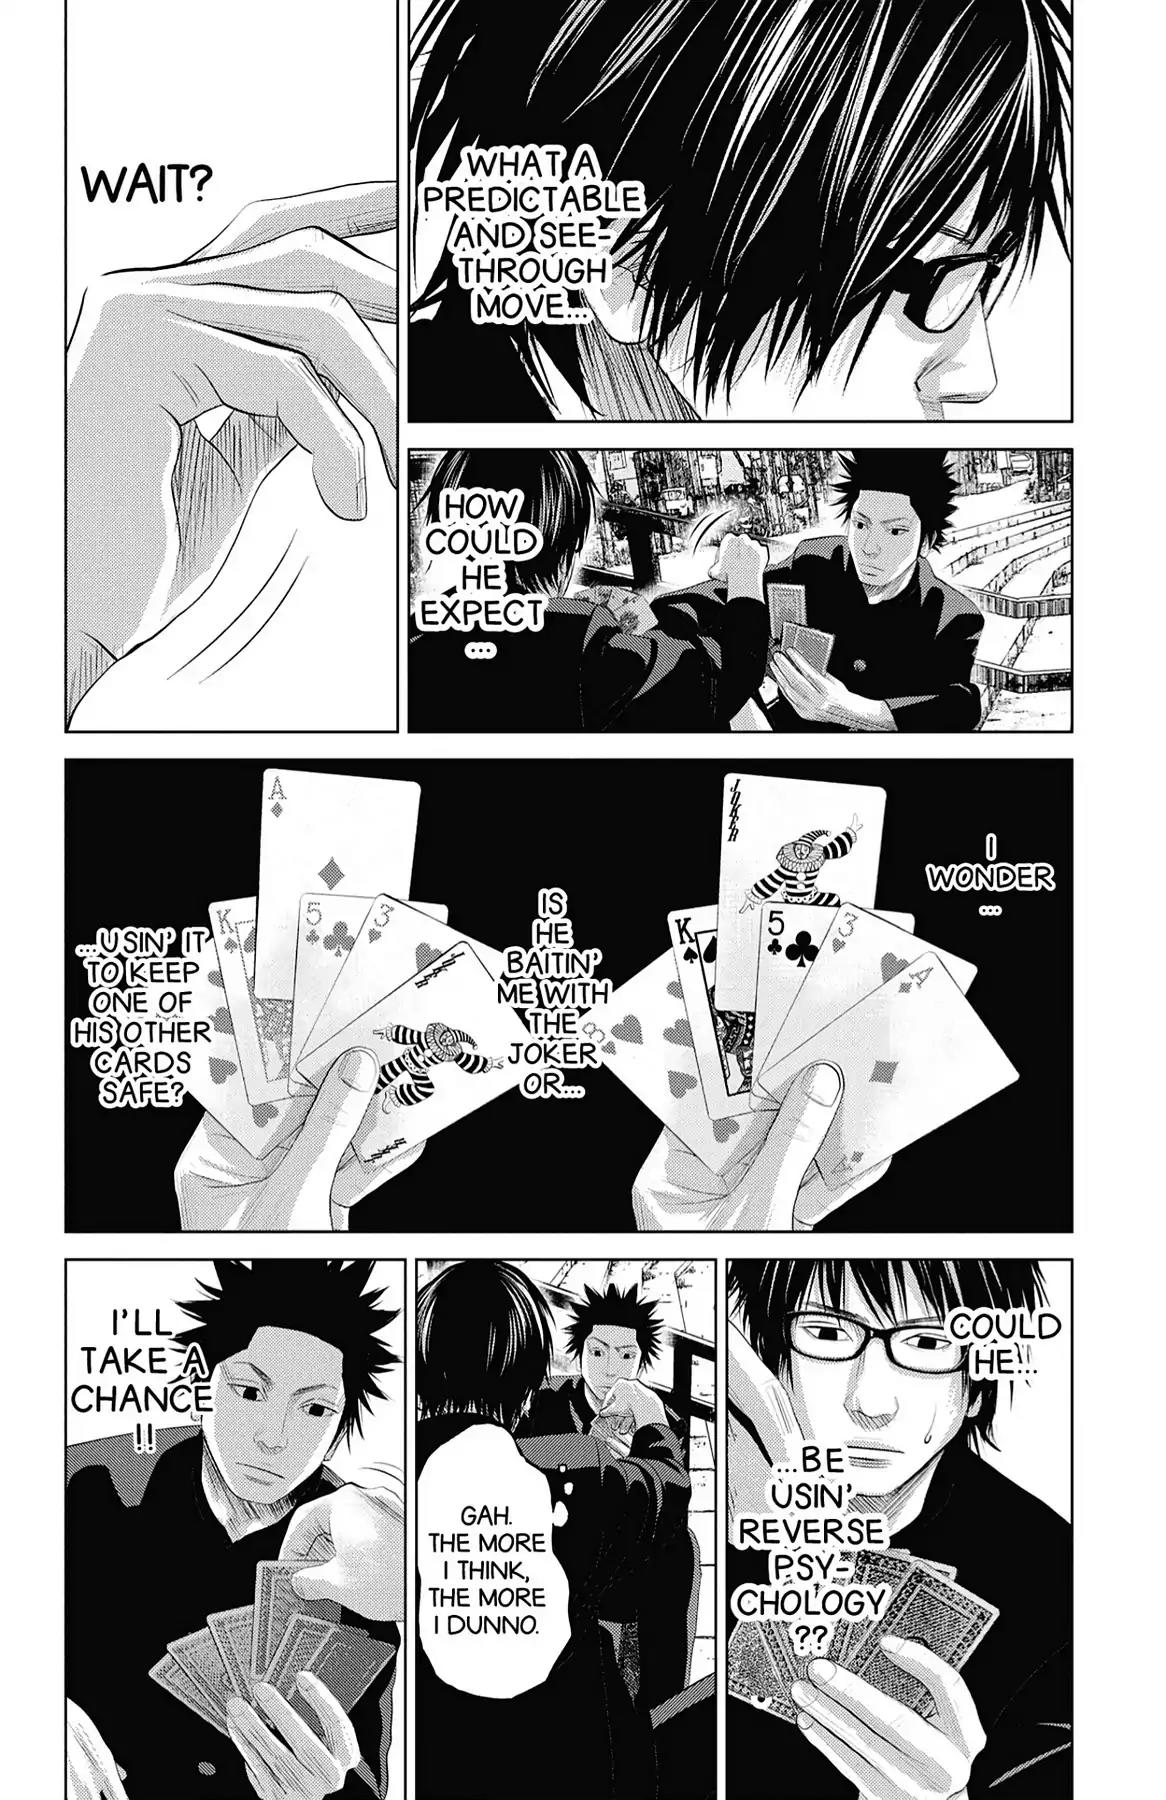 Setoutsumi Vol.2 CHAPTER 9 - CARDS AND JOKERS